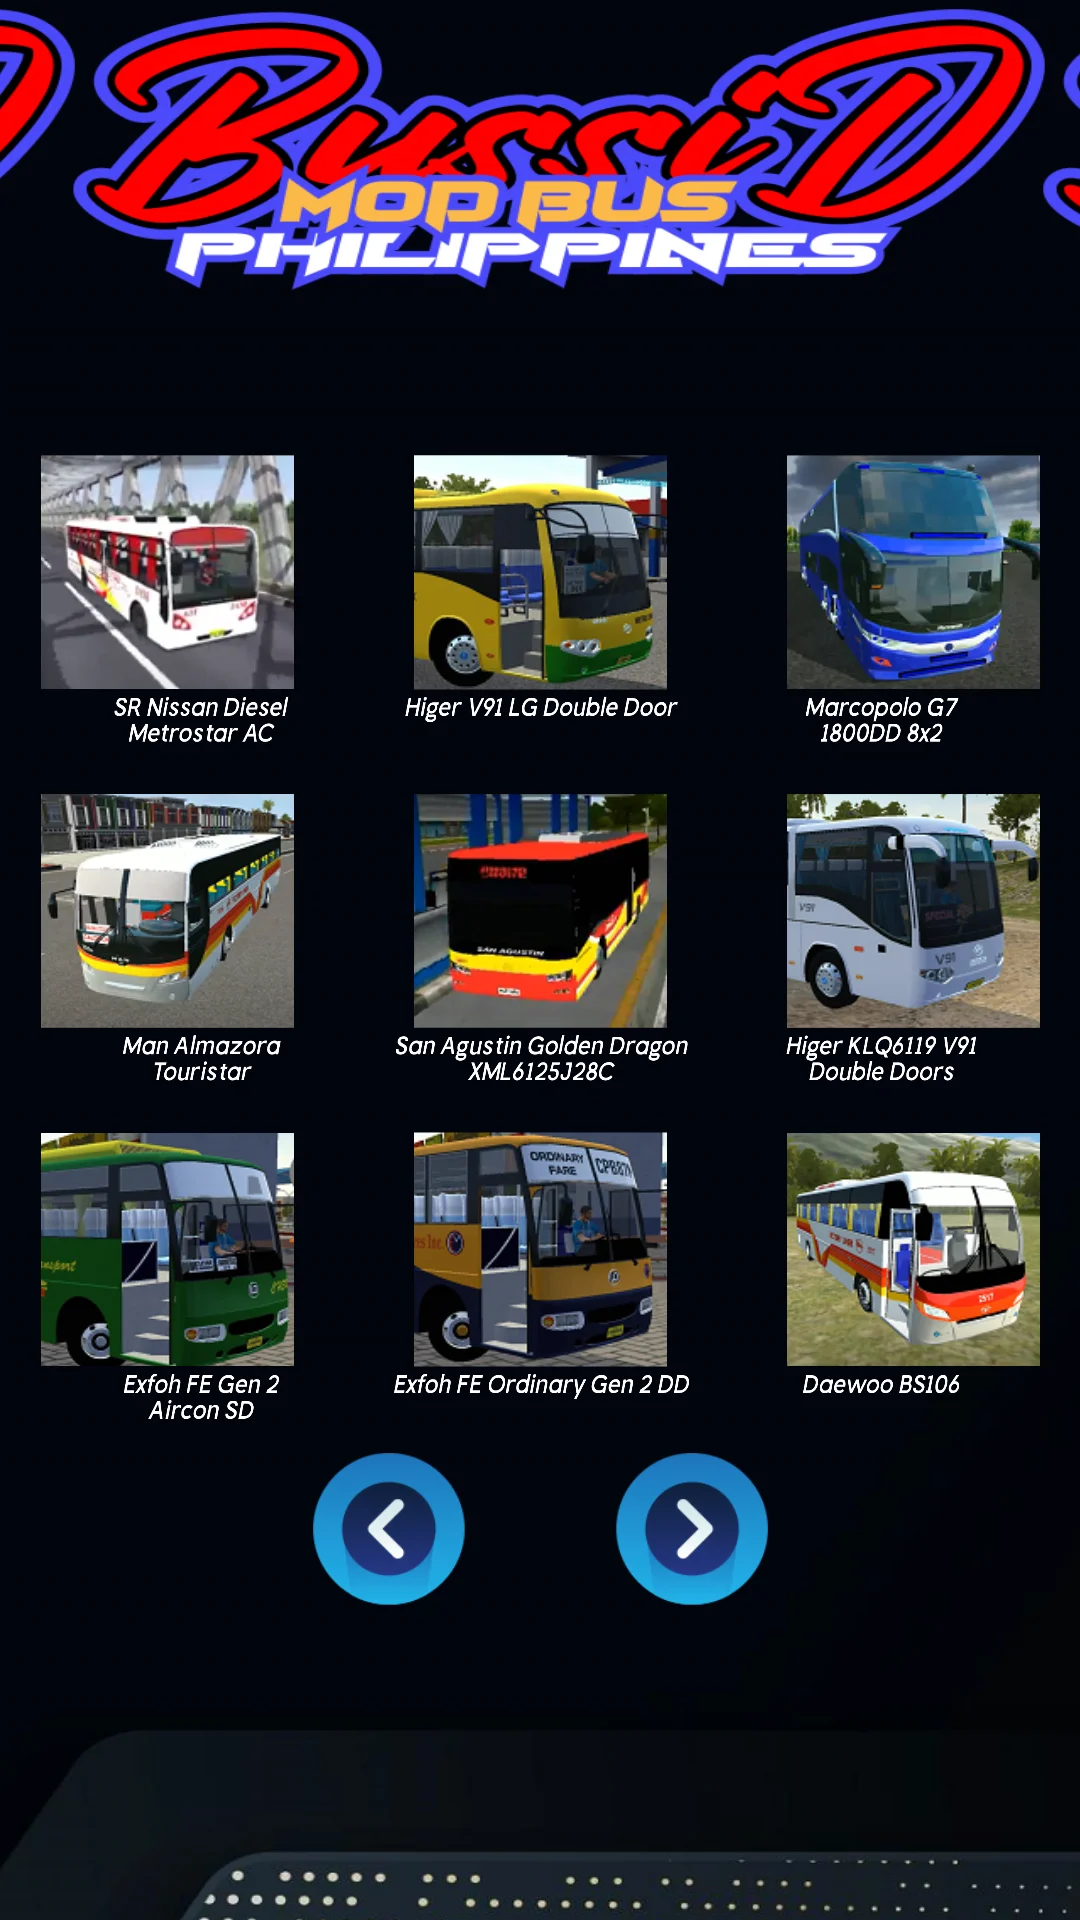 unnamed 10 4 - Bussid Philippines Mod Apk V1 (Unlimited Money) Latest Version